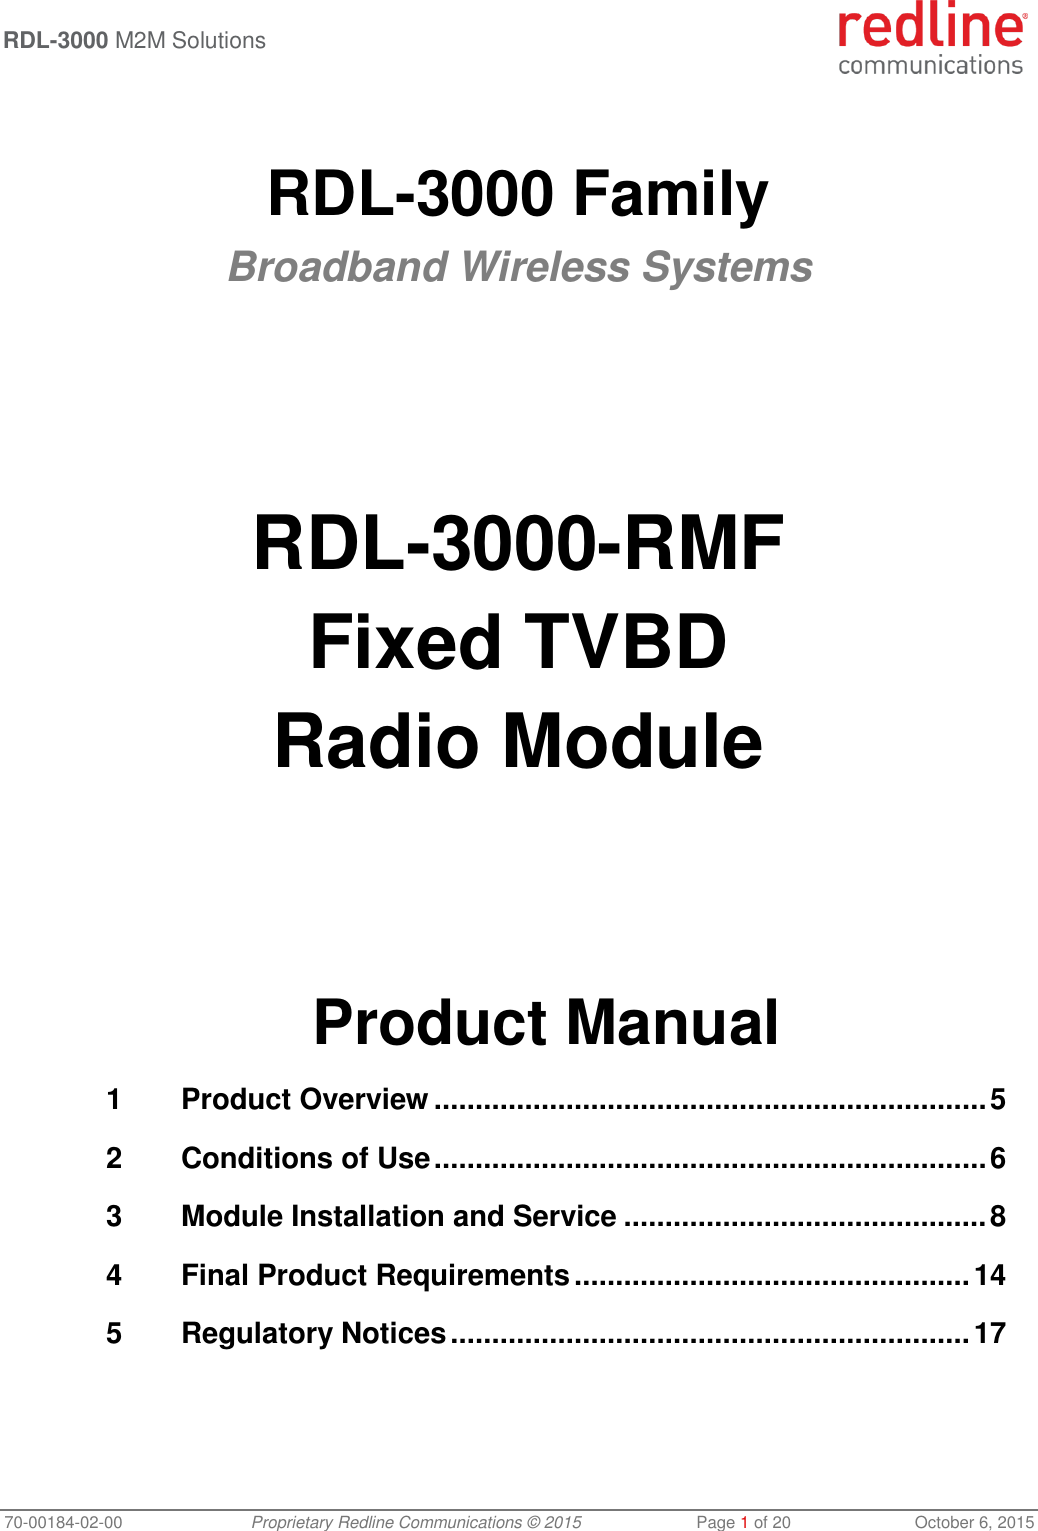  RDL-3000 M2M Solutions   70-00184-02-00 Proprietary Redline Communications © 2015  Page 1 of 20  October 6, 2015  RDL-3000 Family Broadband Wireless Systems       RDL-3000-RMF Fixed TVBD Radio Module       Product Manual 1 Product Overview ................................................................... 5 2 Conditions of Use ................................................................... 6 3 Module Installation and Service ............................................ 8 4 Final Product Requirements ................................................ 14 5 Regulatory Notices ............................................................... 17 